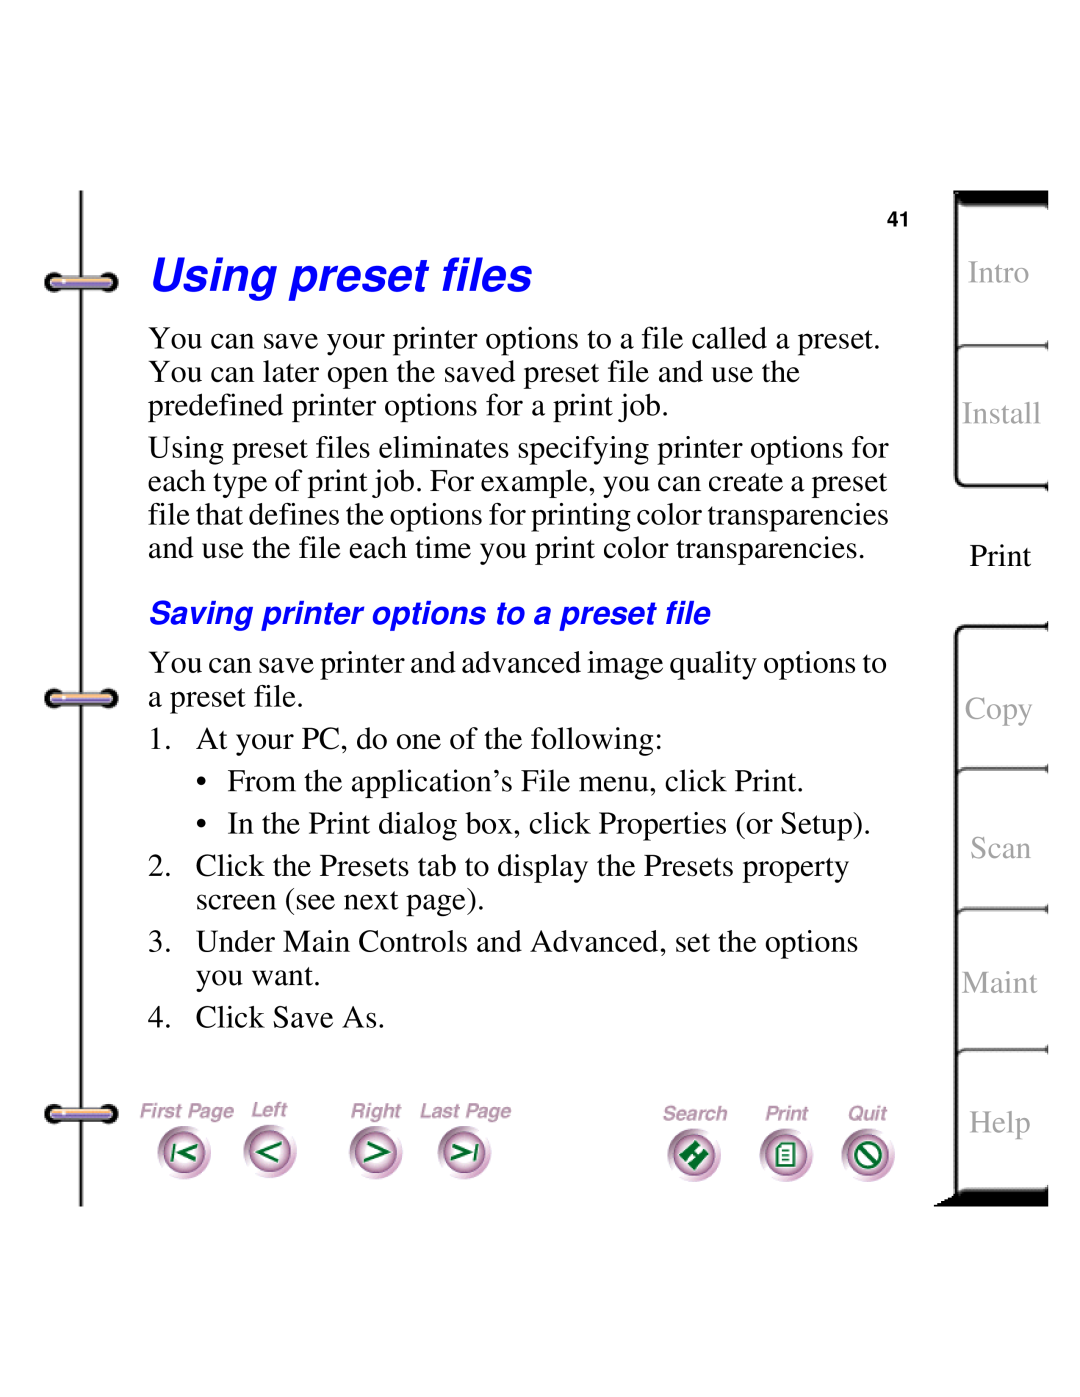 Xerox Document HomeCentre Using preset files, Saving printer options to a preset file, Intro, Install, Copy, Scan, Maint 